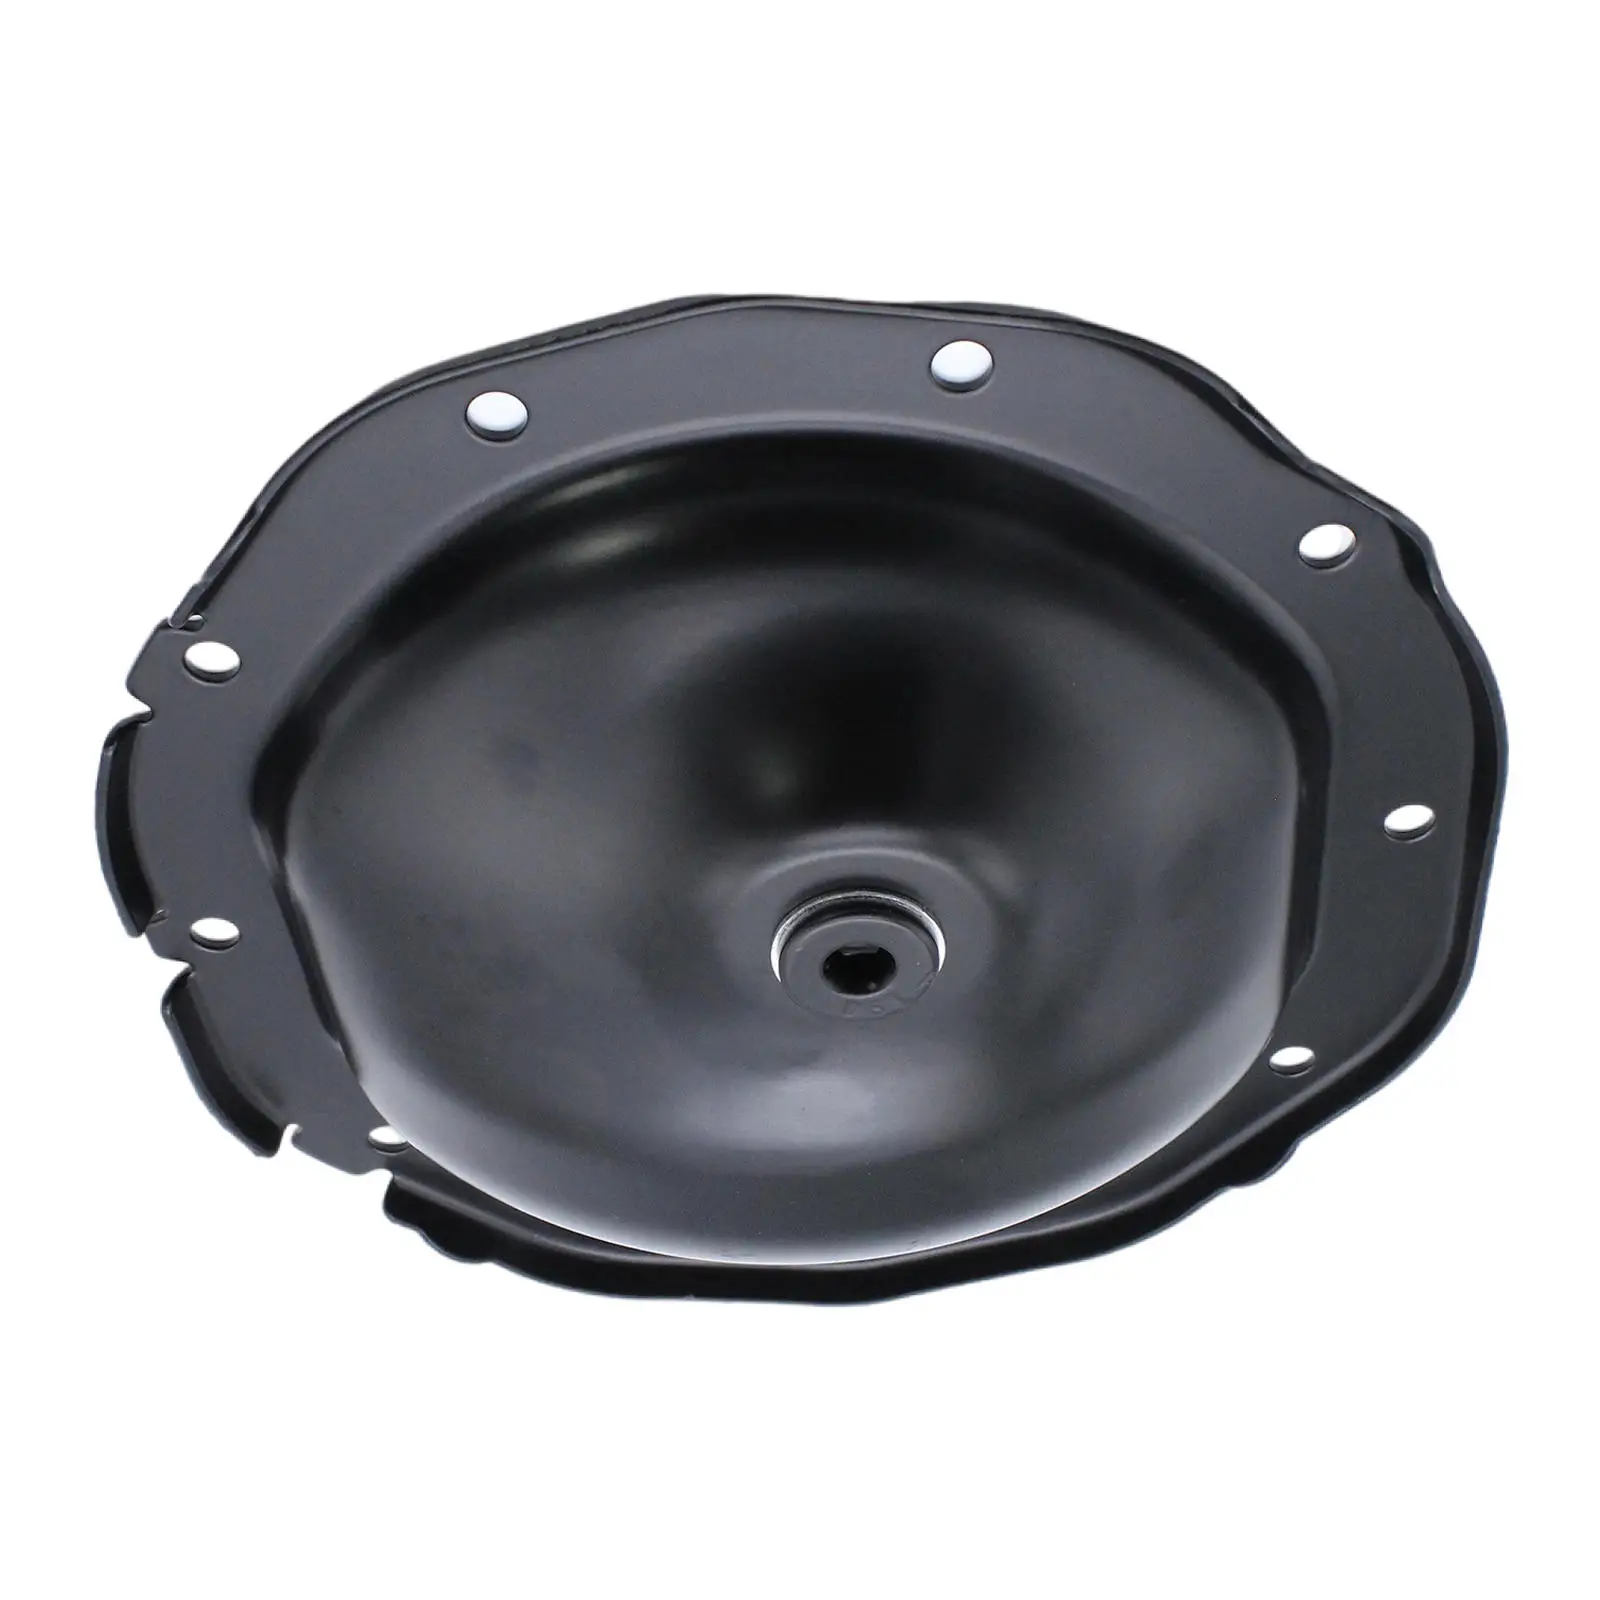 Rear Differential Cover Black 697-700 15290822 40039162 697-706 Fit for GMC 1500 Parts Direct Replacement Accessories